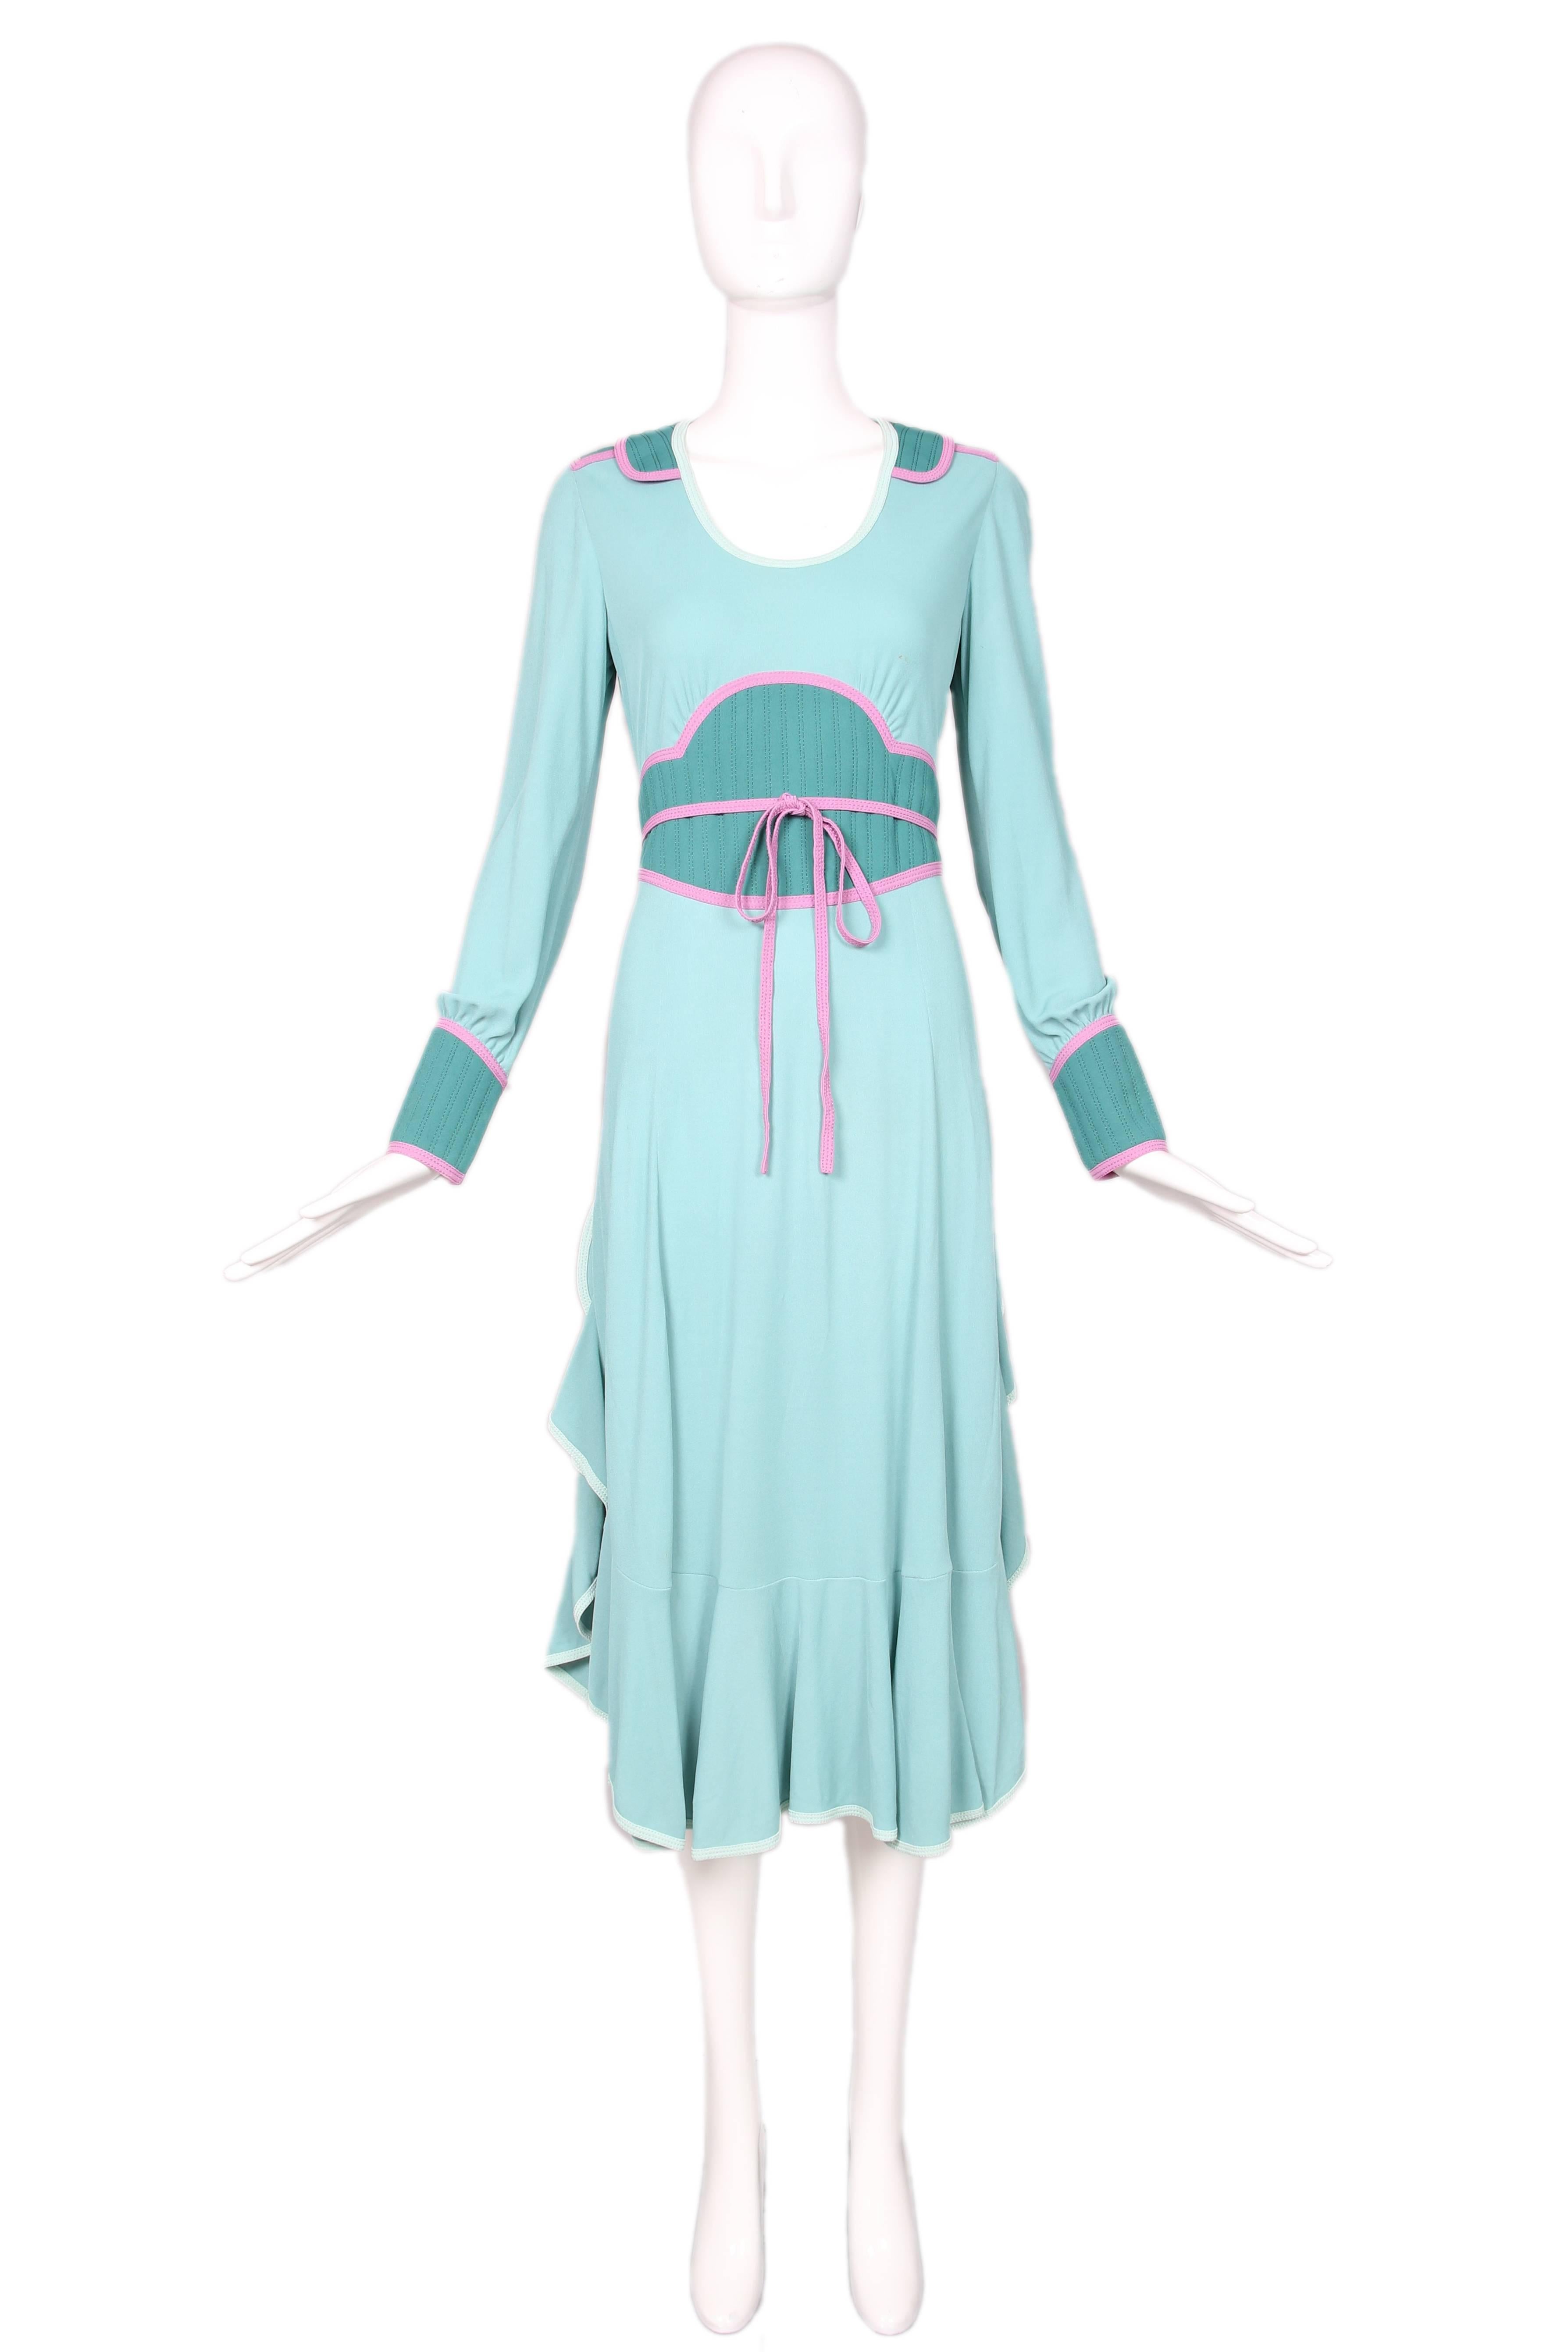 From the iconic 2002 collection is this Marc Jacobs green & pink long sleeved color blocked maxi dress w/quilted colorblock detailing at cuffs, bodice, and shoulder. Features a pink tie at waist and ruffling at skirt sides & hem. In